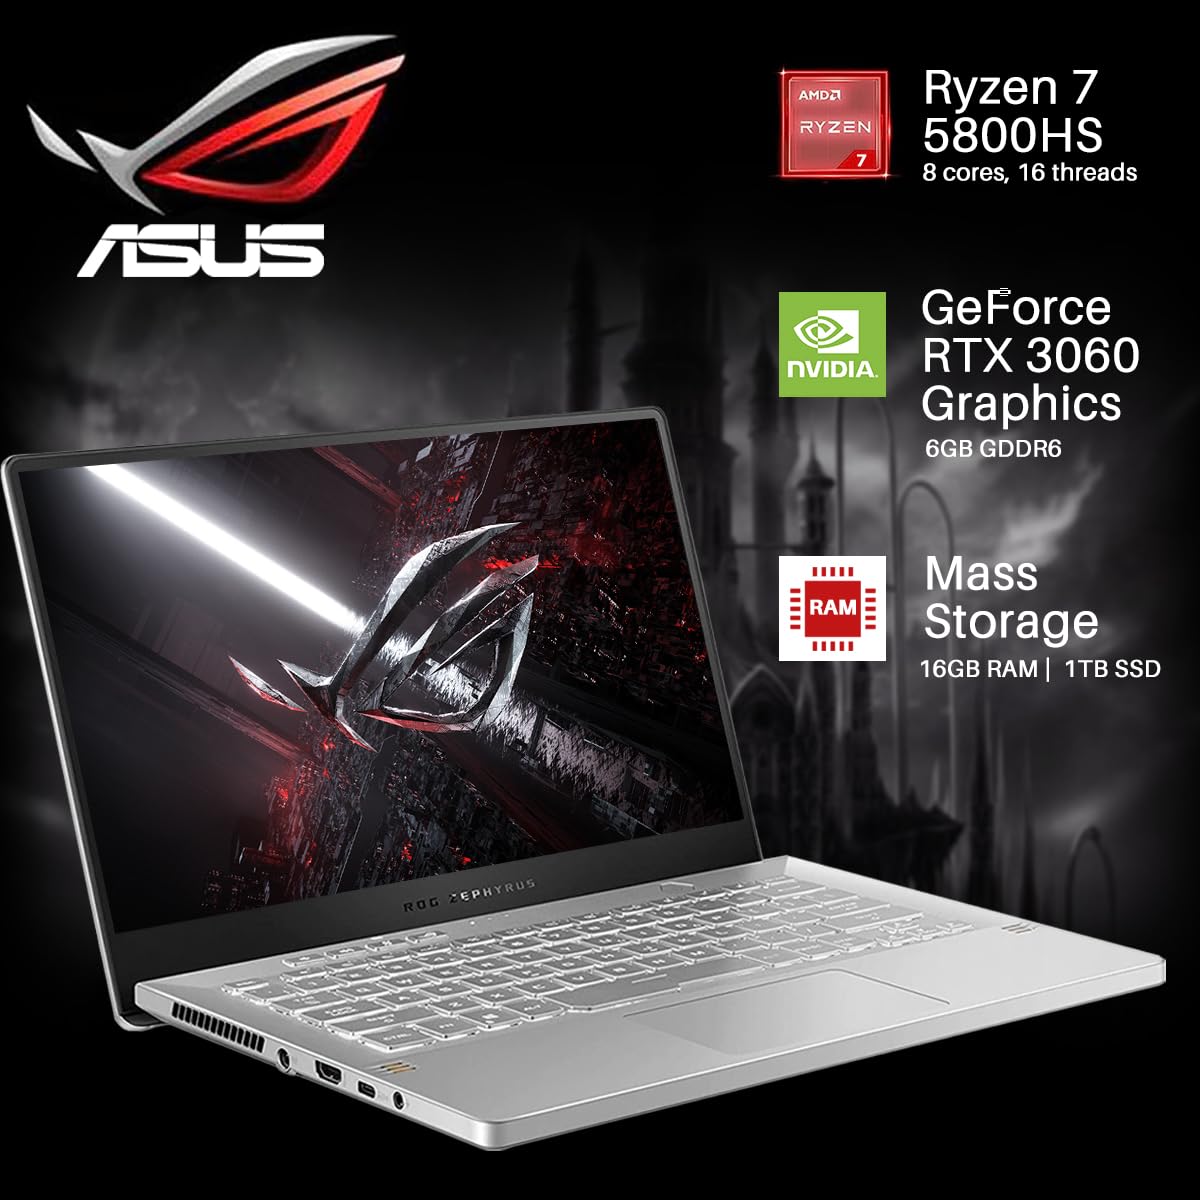 ASUS ROG Zephyrus Gaming Laptop 2023 Newest, 14" FHD 144HZ Display, AMD Ryzen 7 5800HS(Up to 4.4 GHz), NVIDIA GeForce RTX 3060 Graphics, 16GB RAM, 1TB SSD, Bluetooth, Wifi6, Windows 11 Home, White